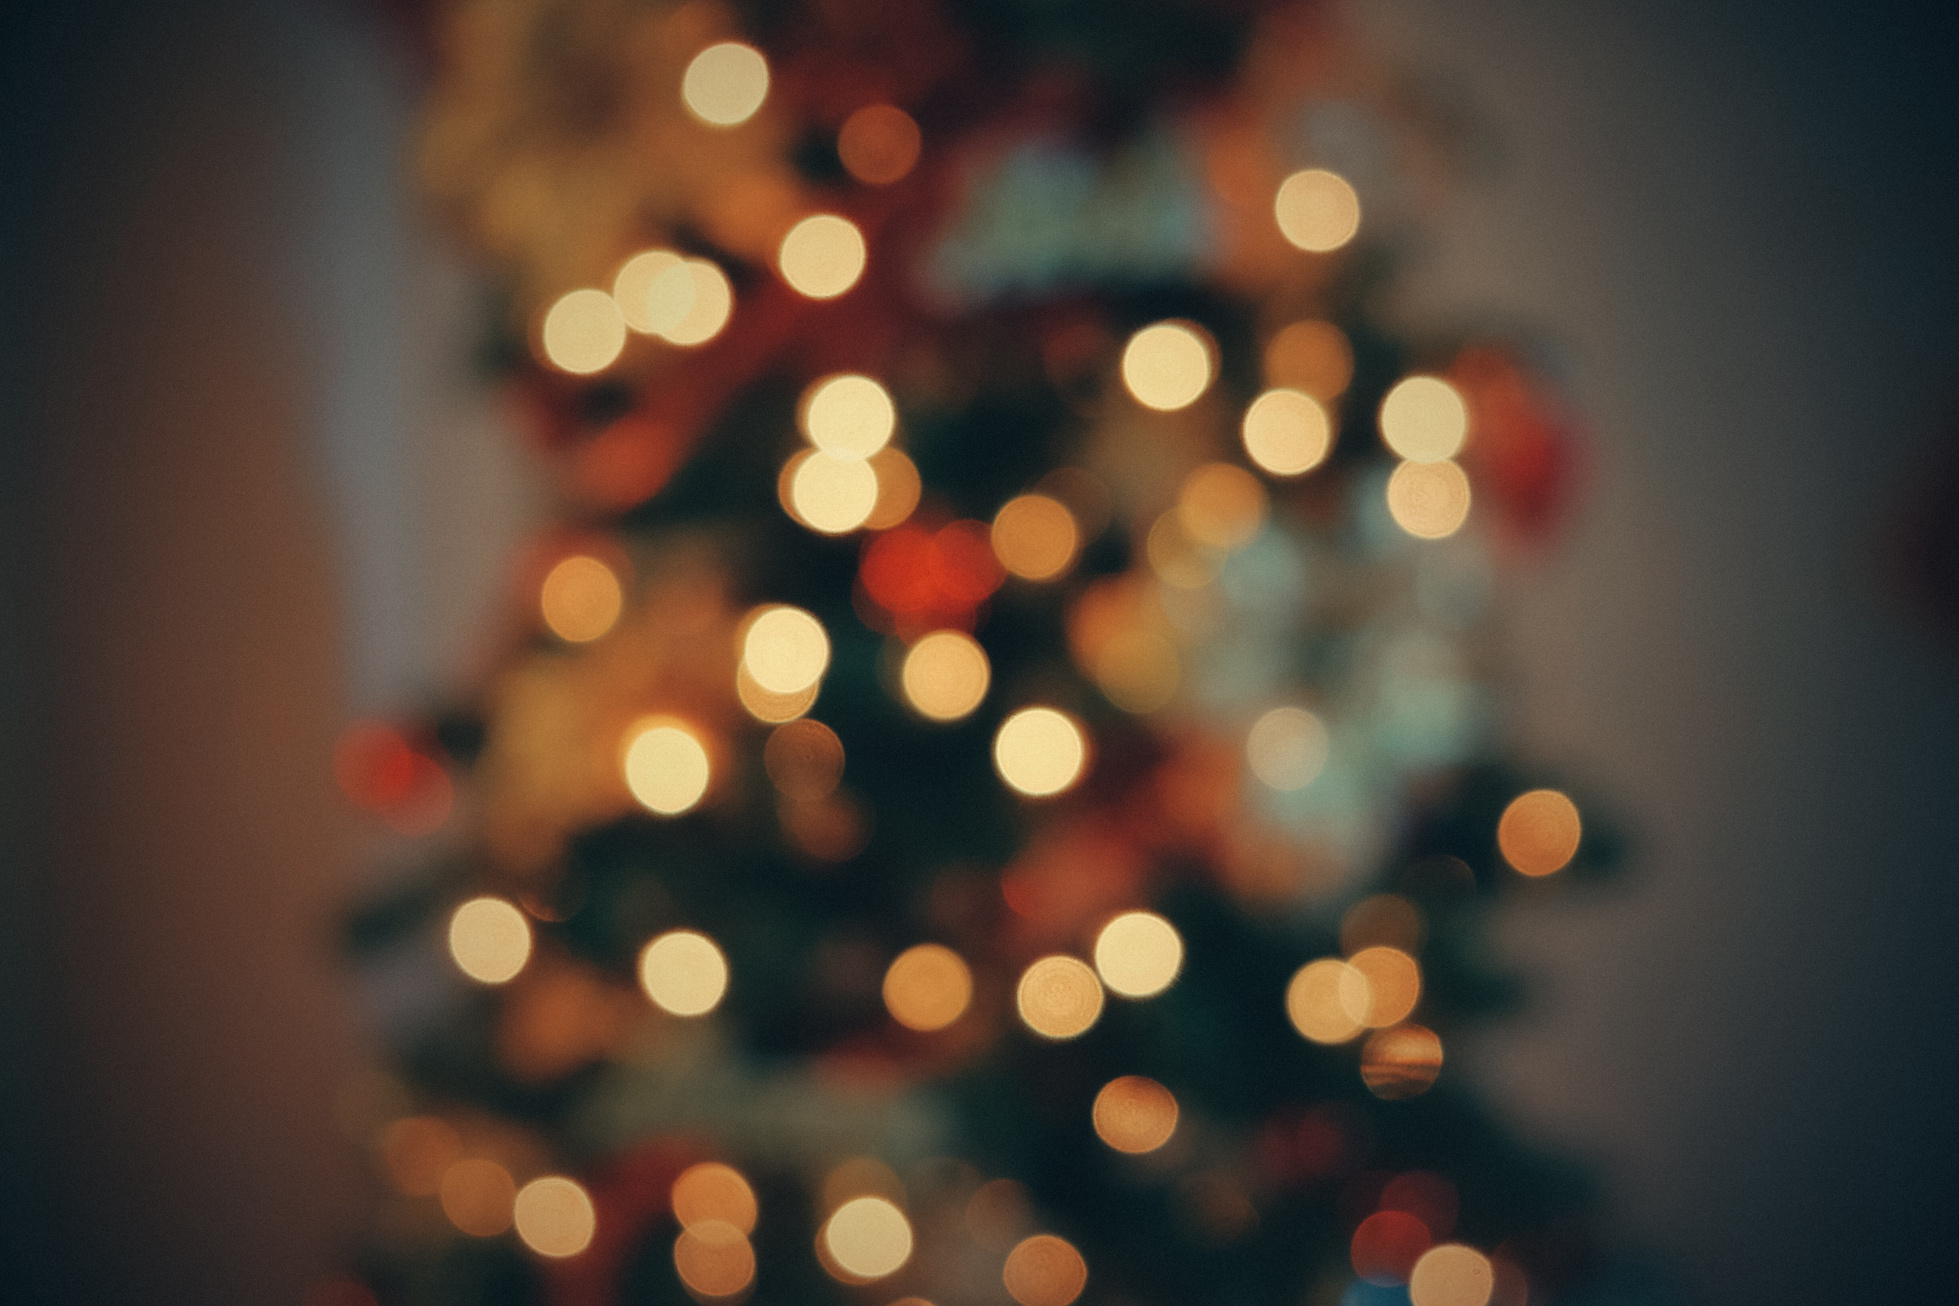 Blurry Background of a Christmas Tree